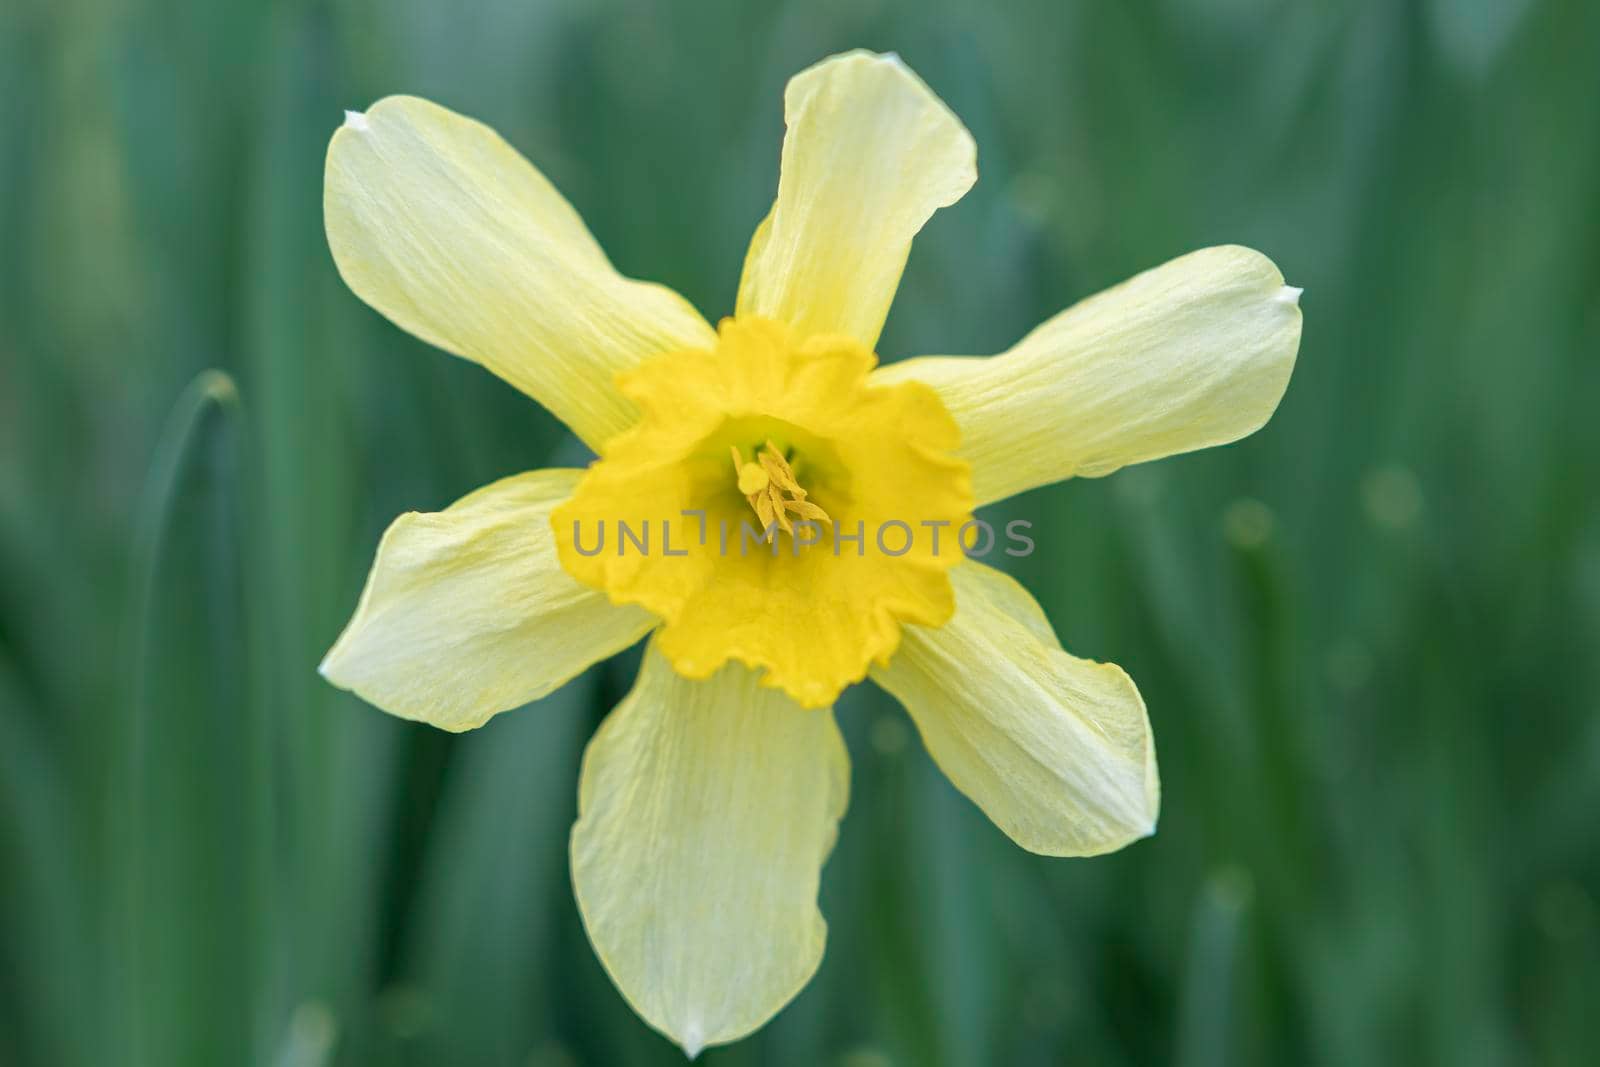 narcissus flower on a green background close-up. photo